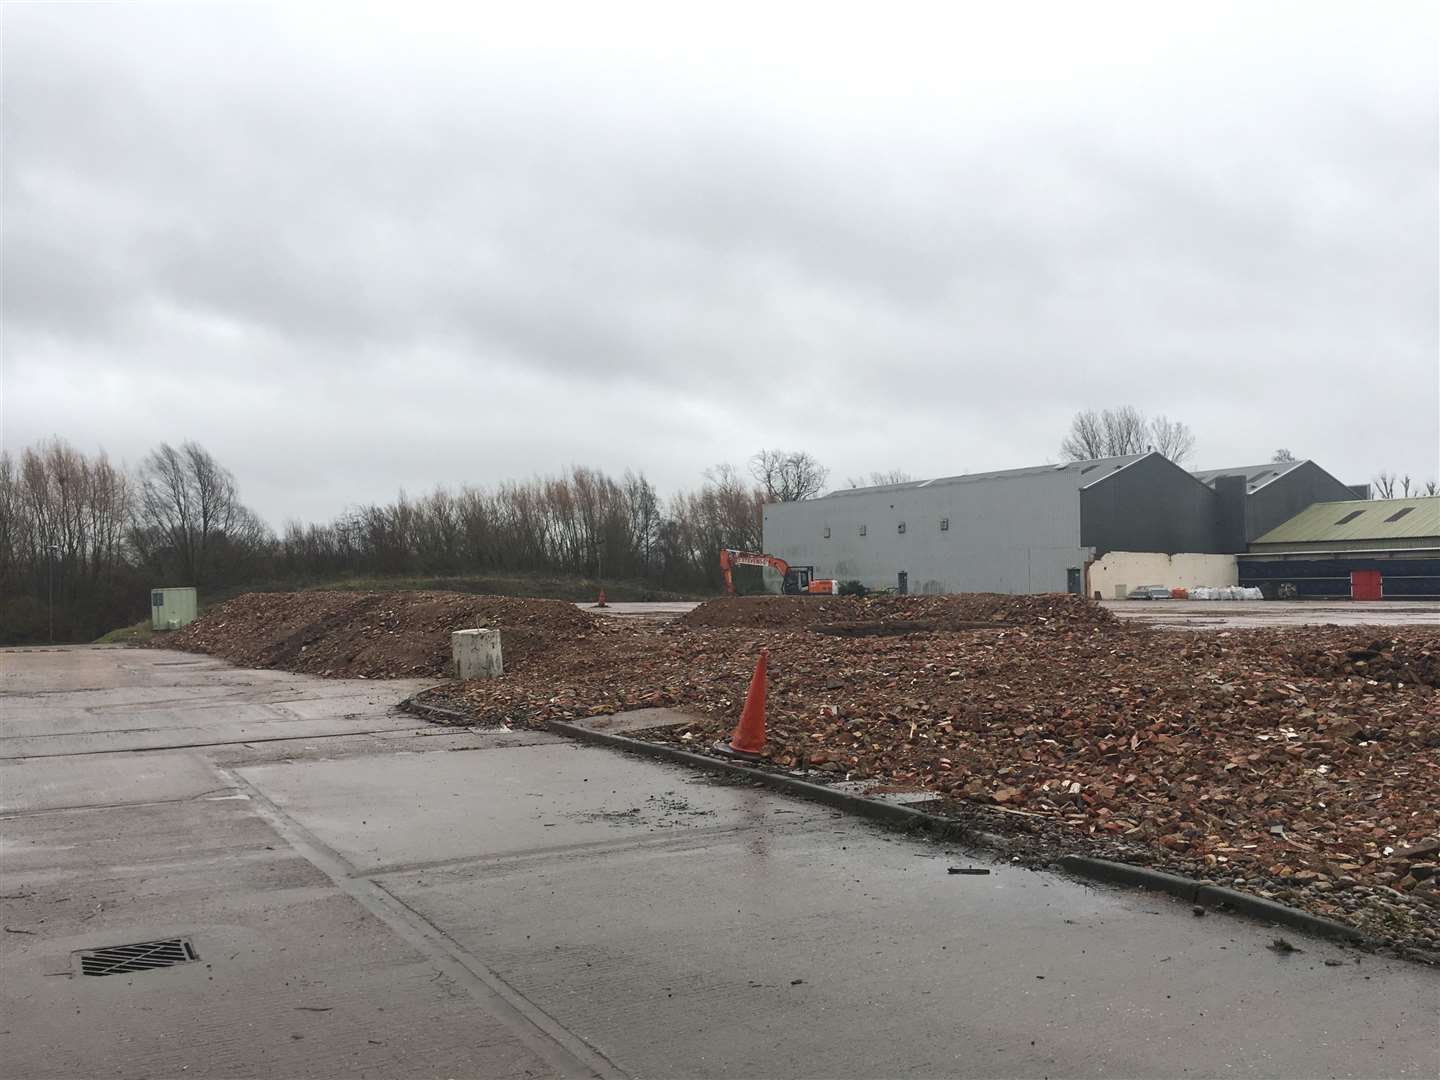 The site was levelled in 2019